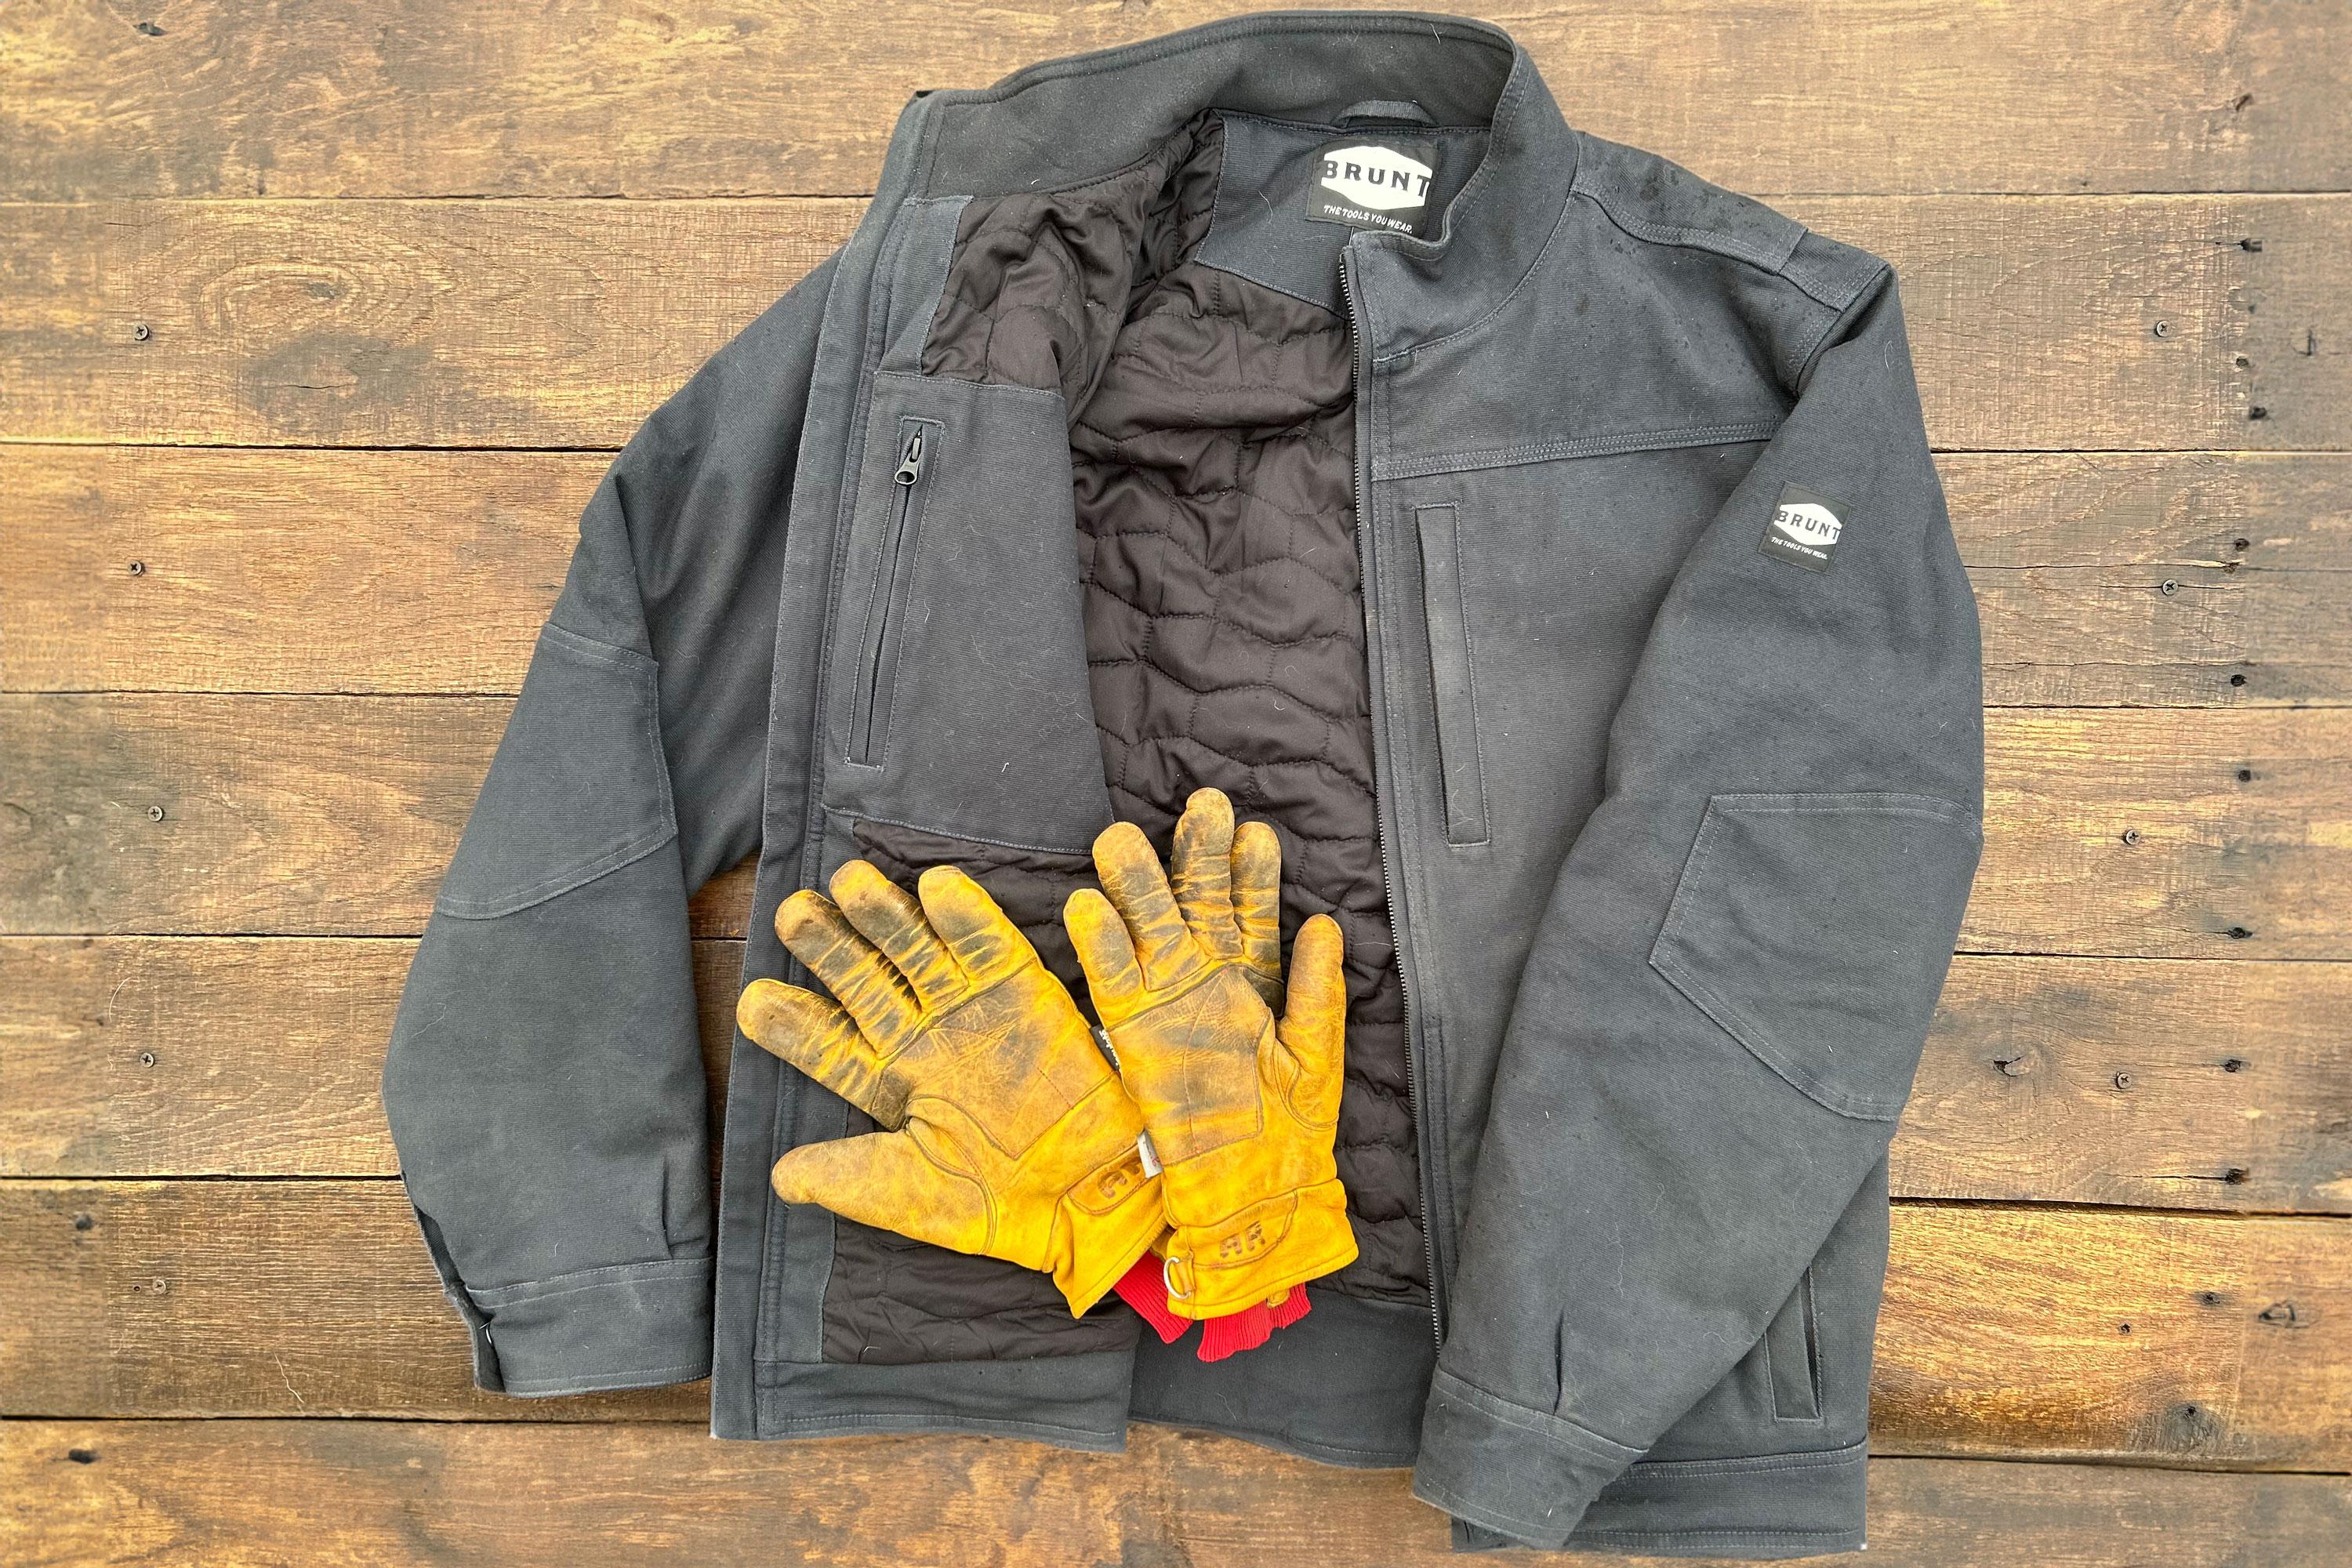 BRUNT The Scott Jacket Review: A Work Coat for the Everyman